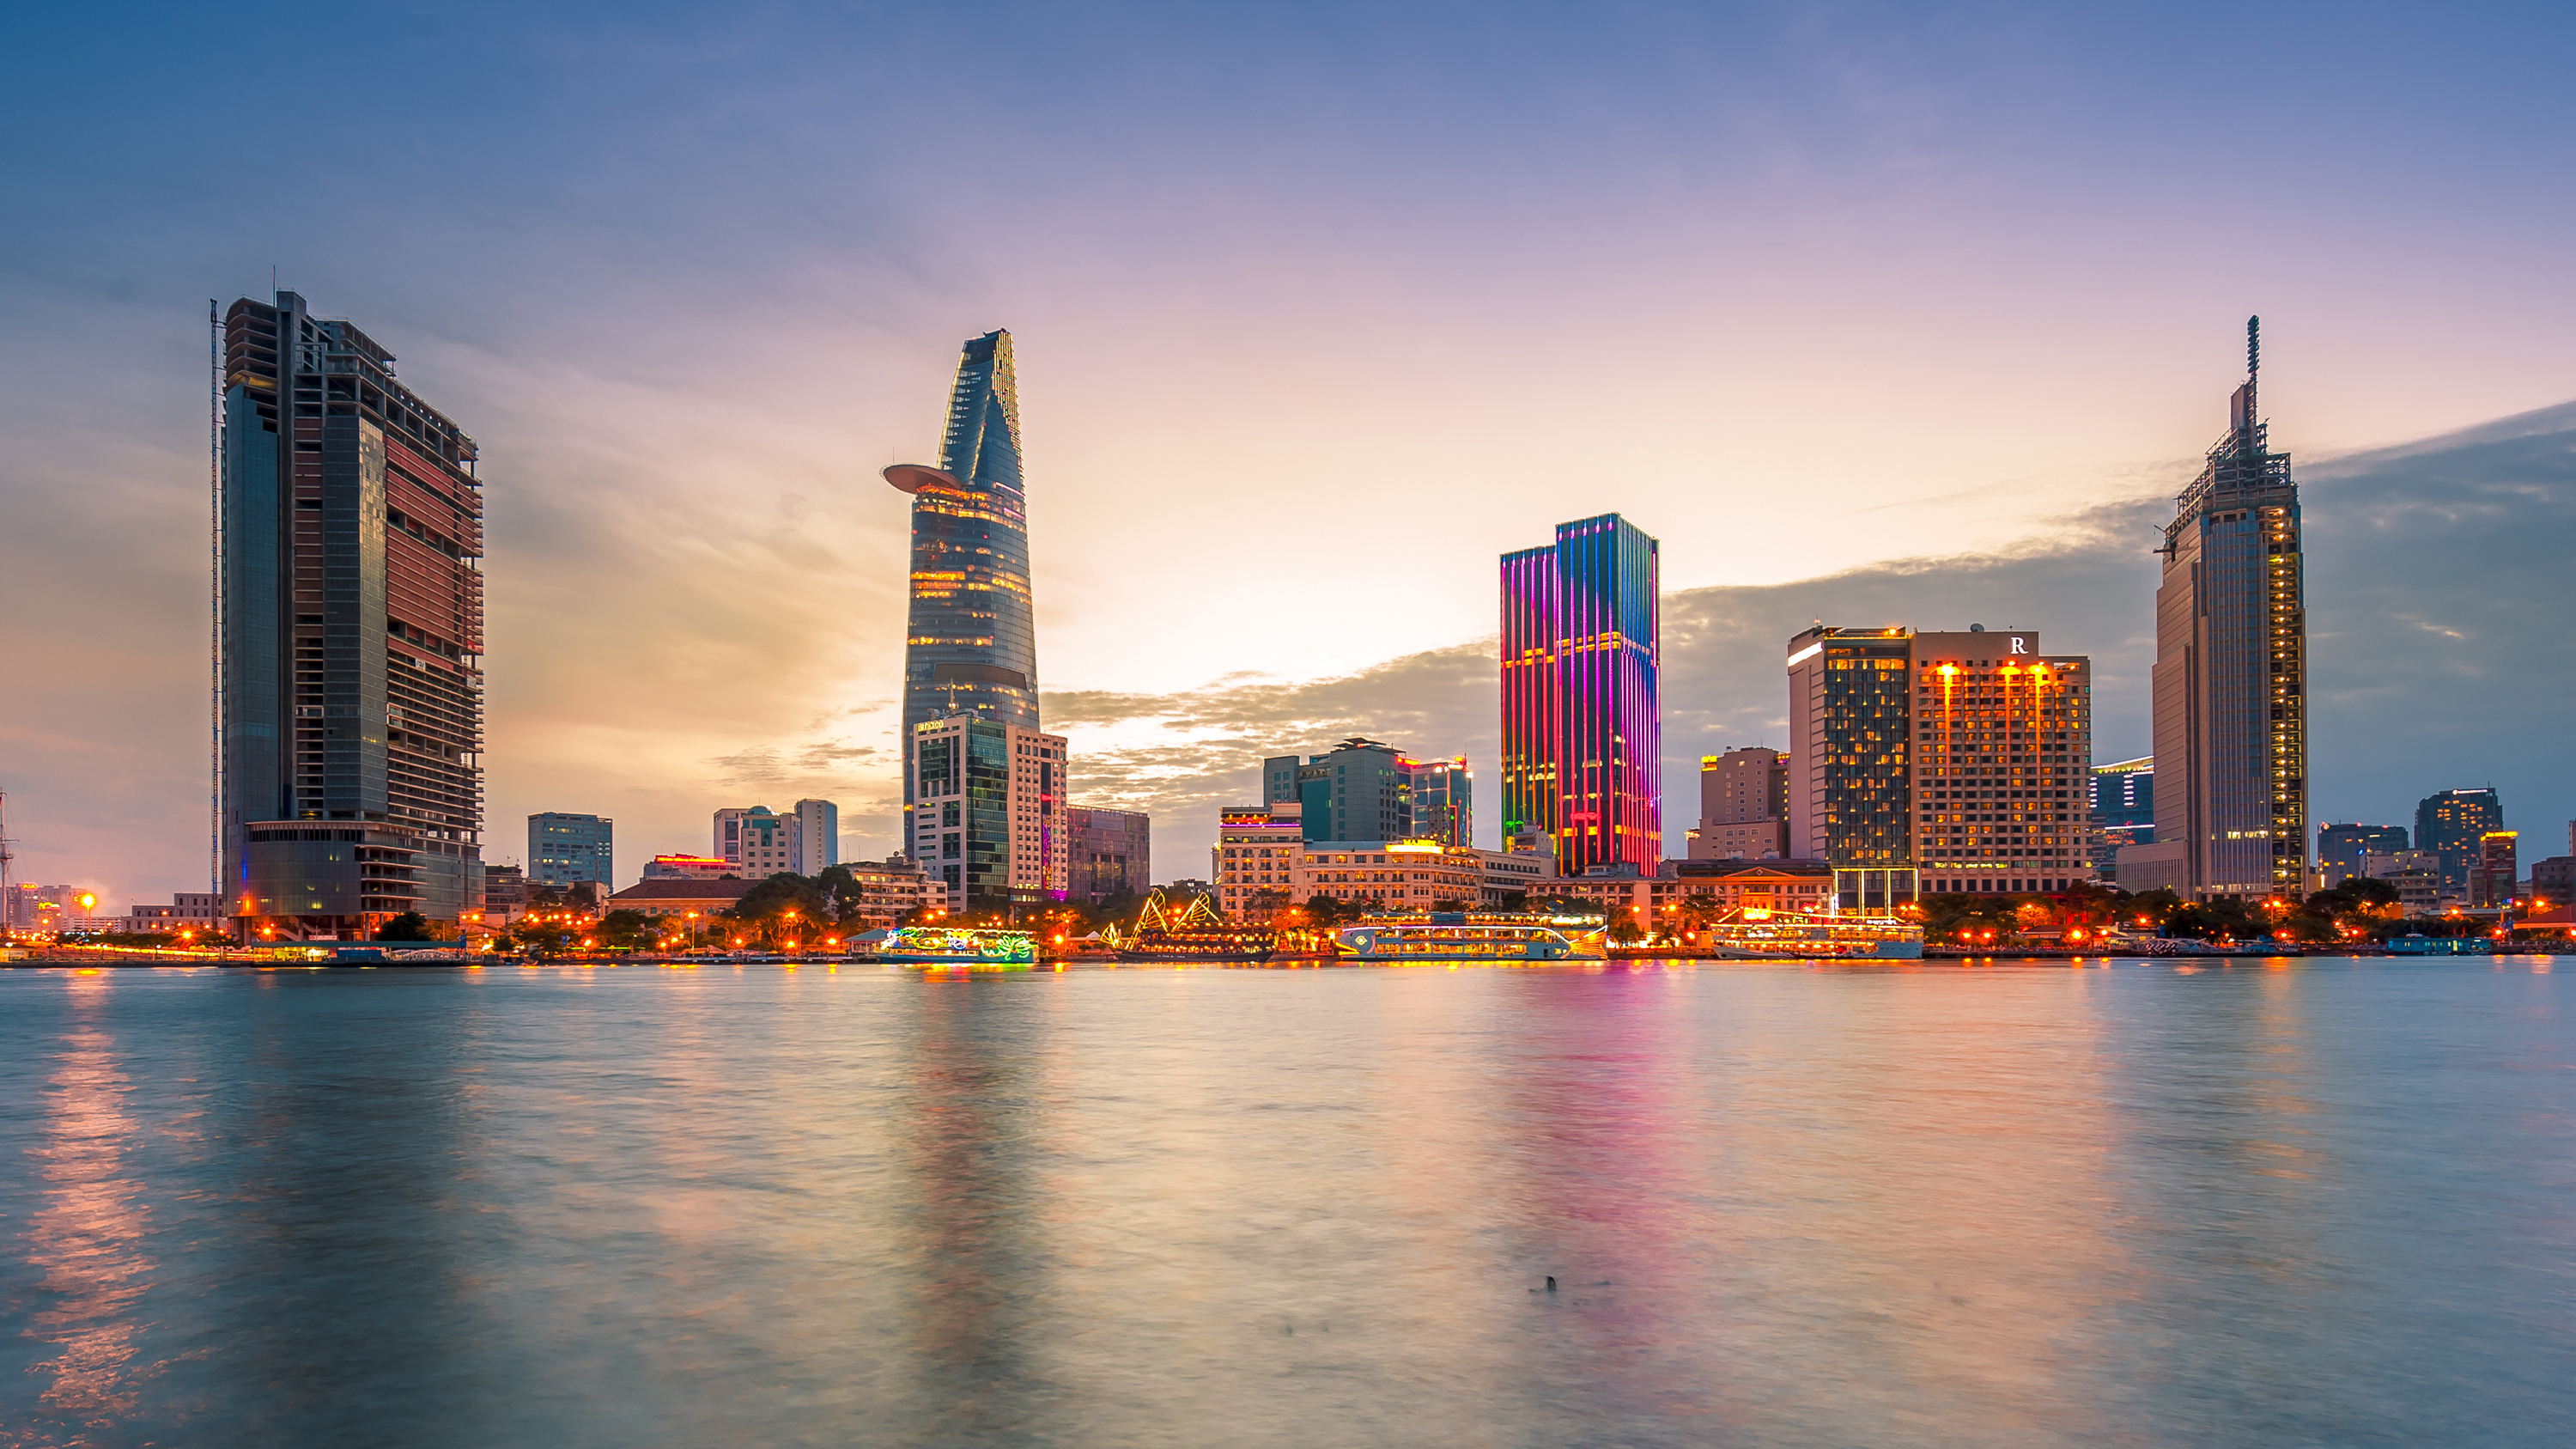 The Saigon financial district across the water at sunset